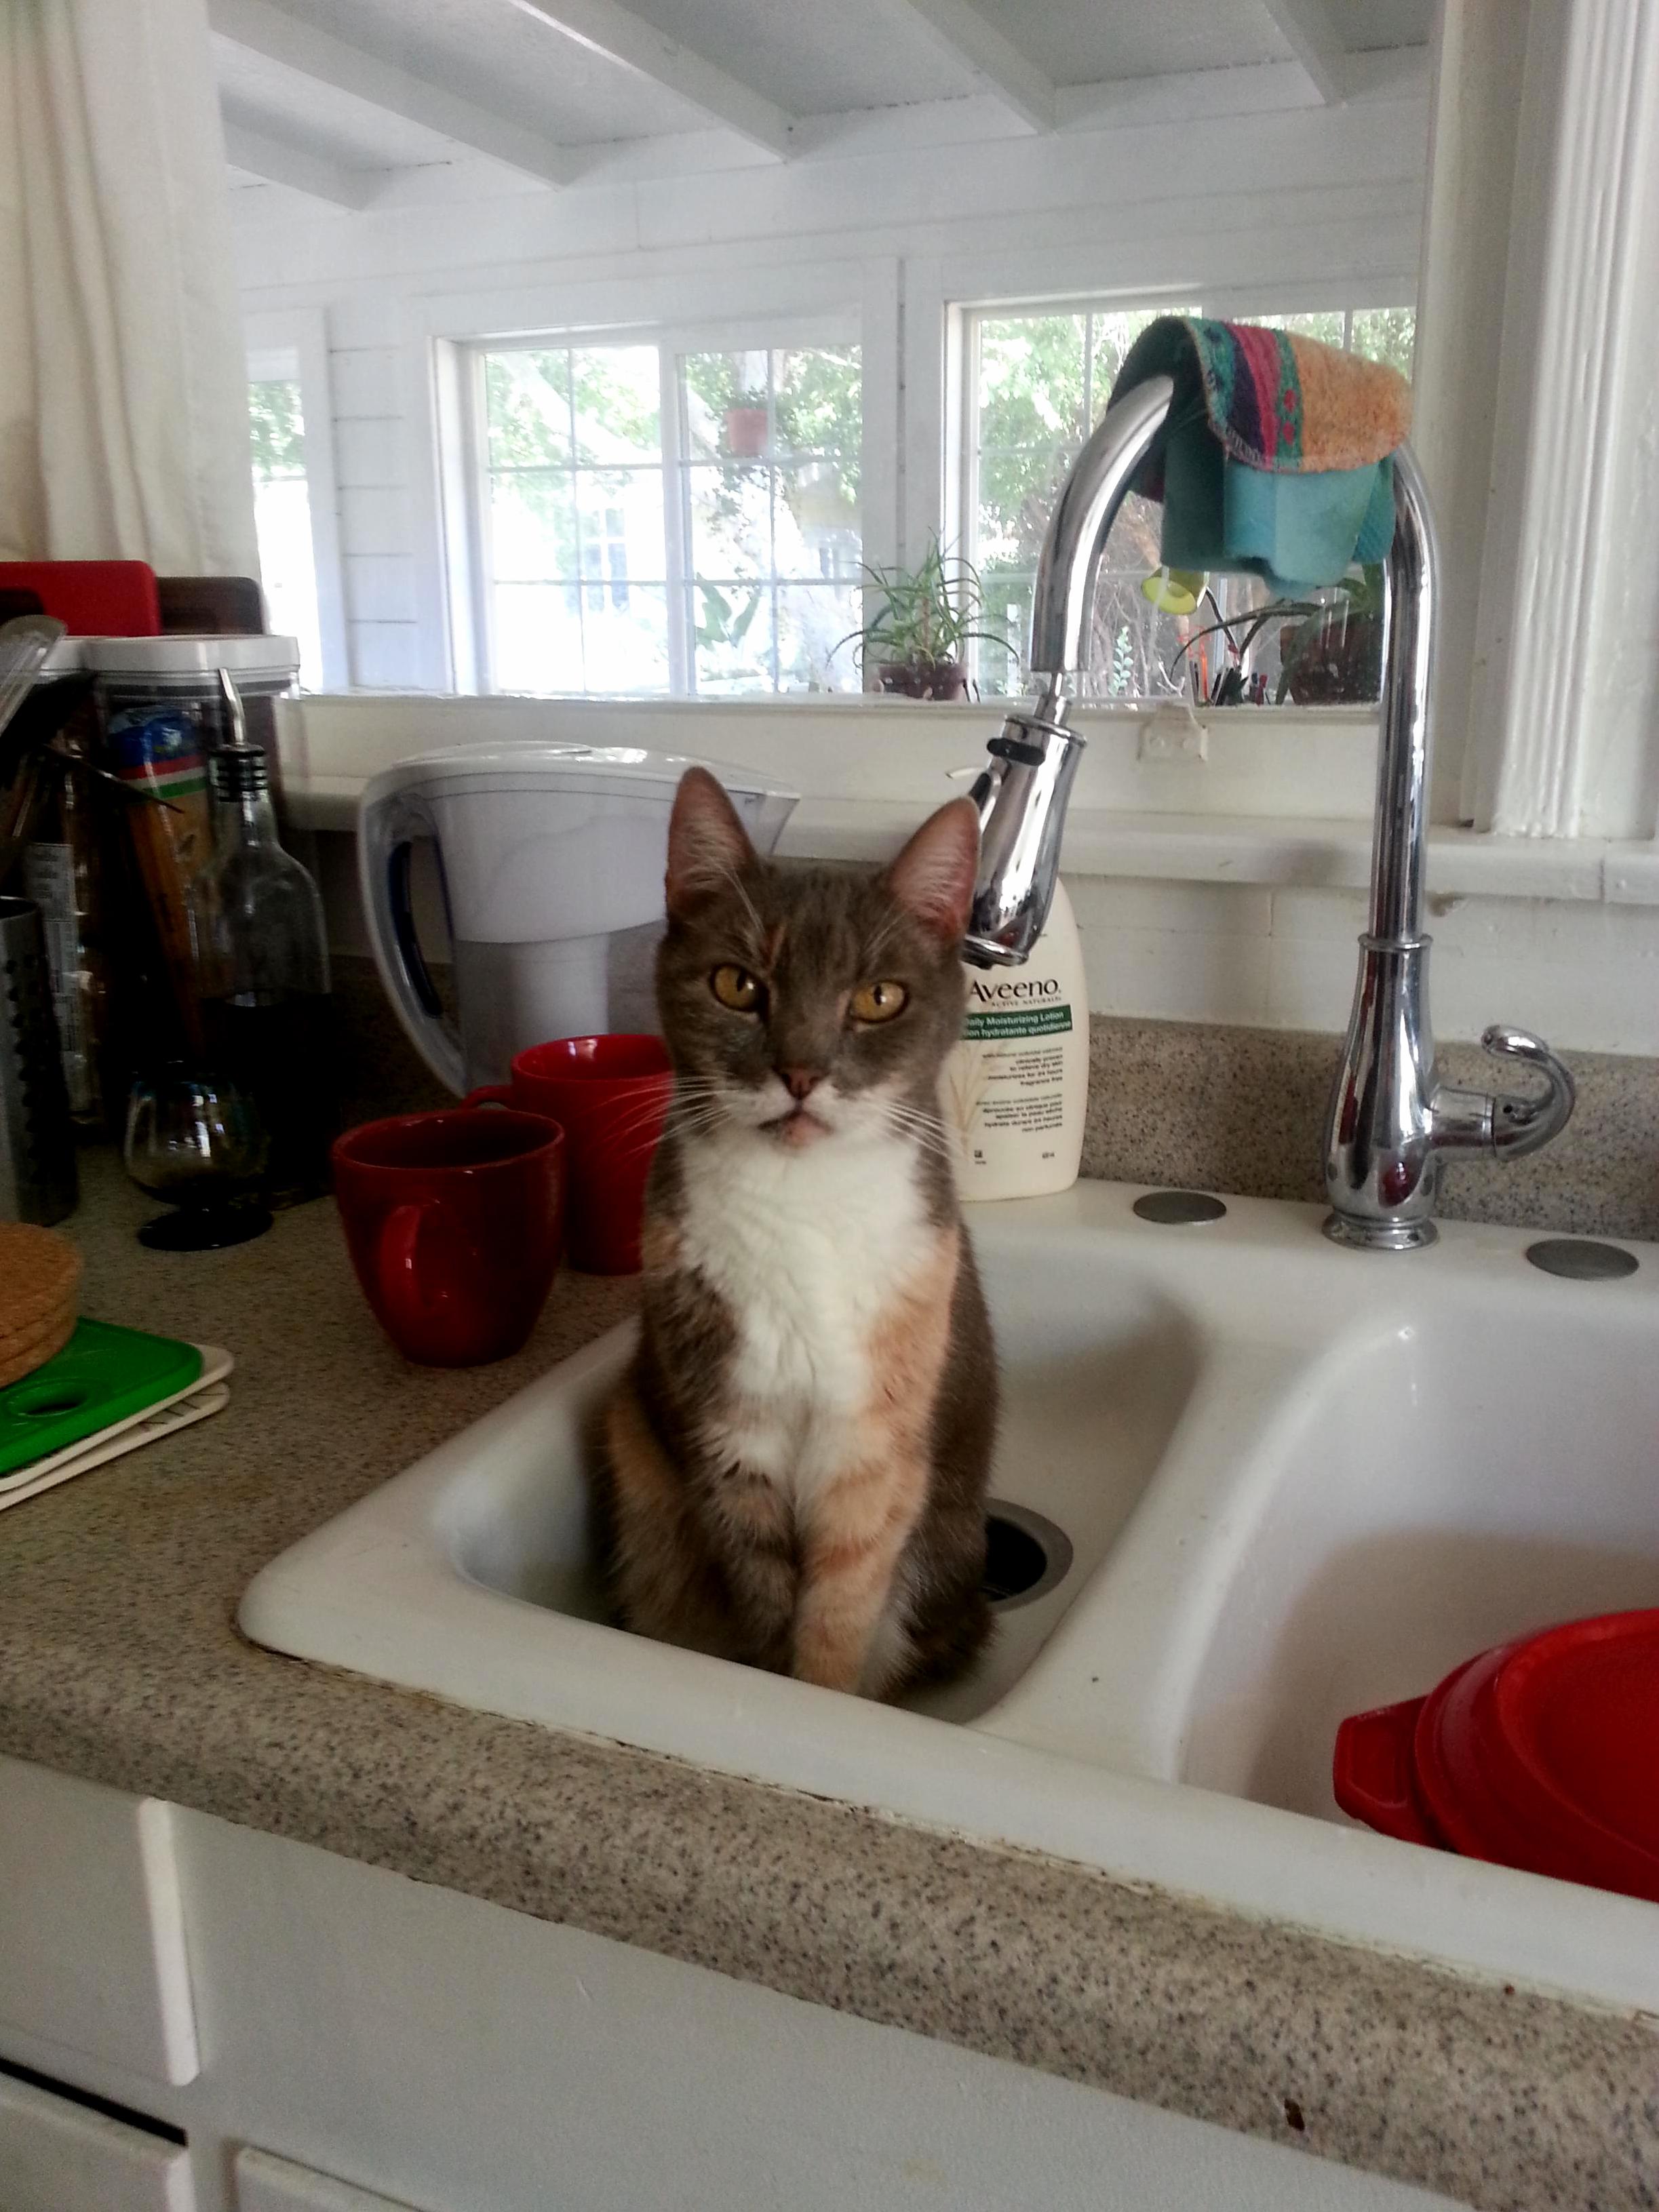 She likes the sink.